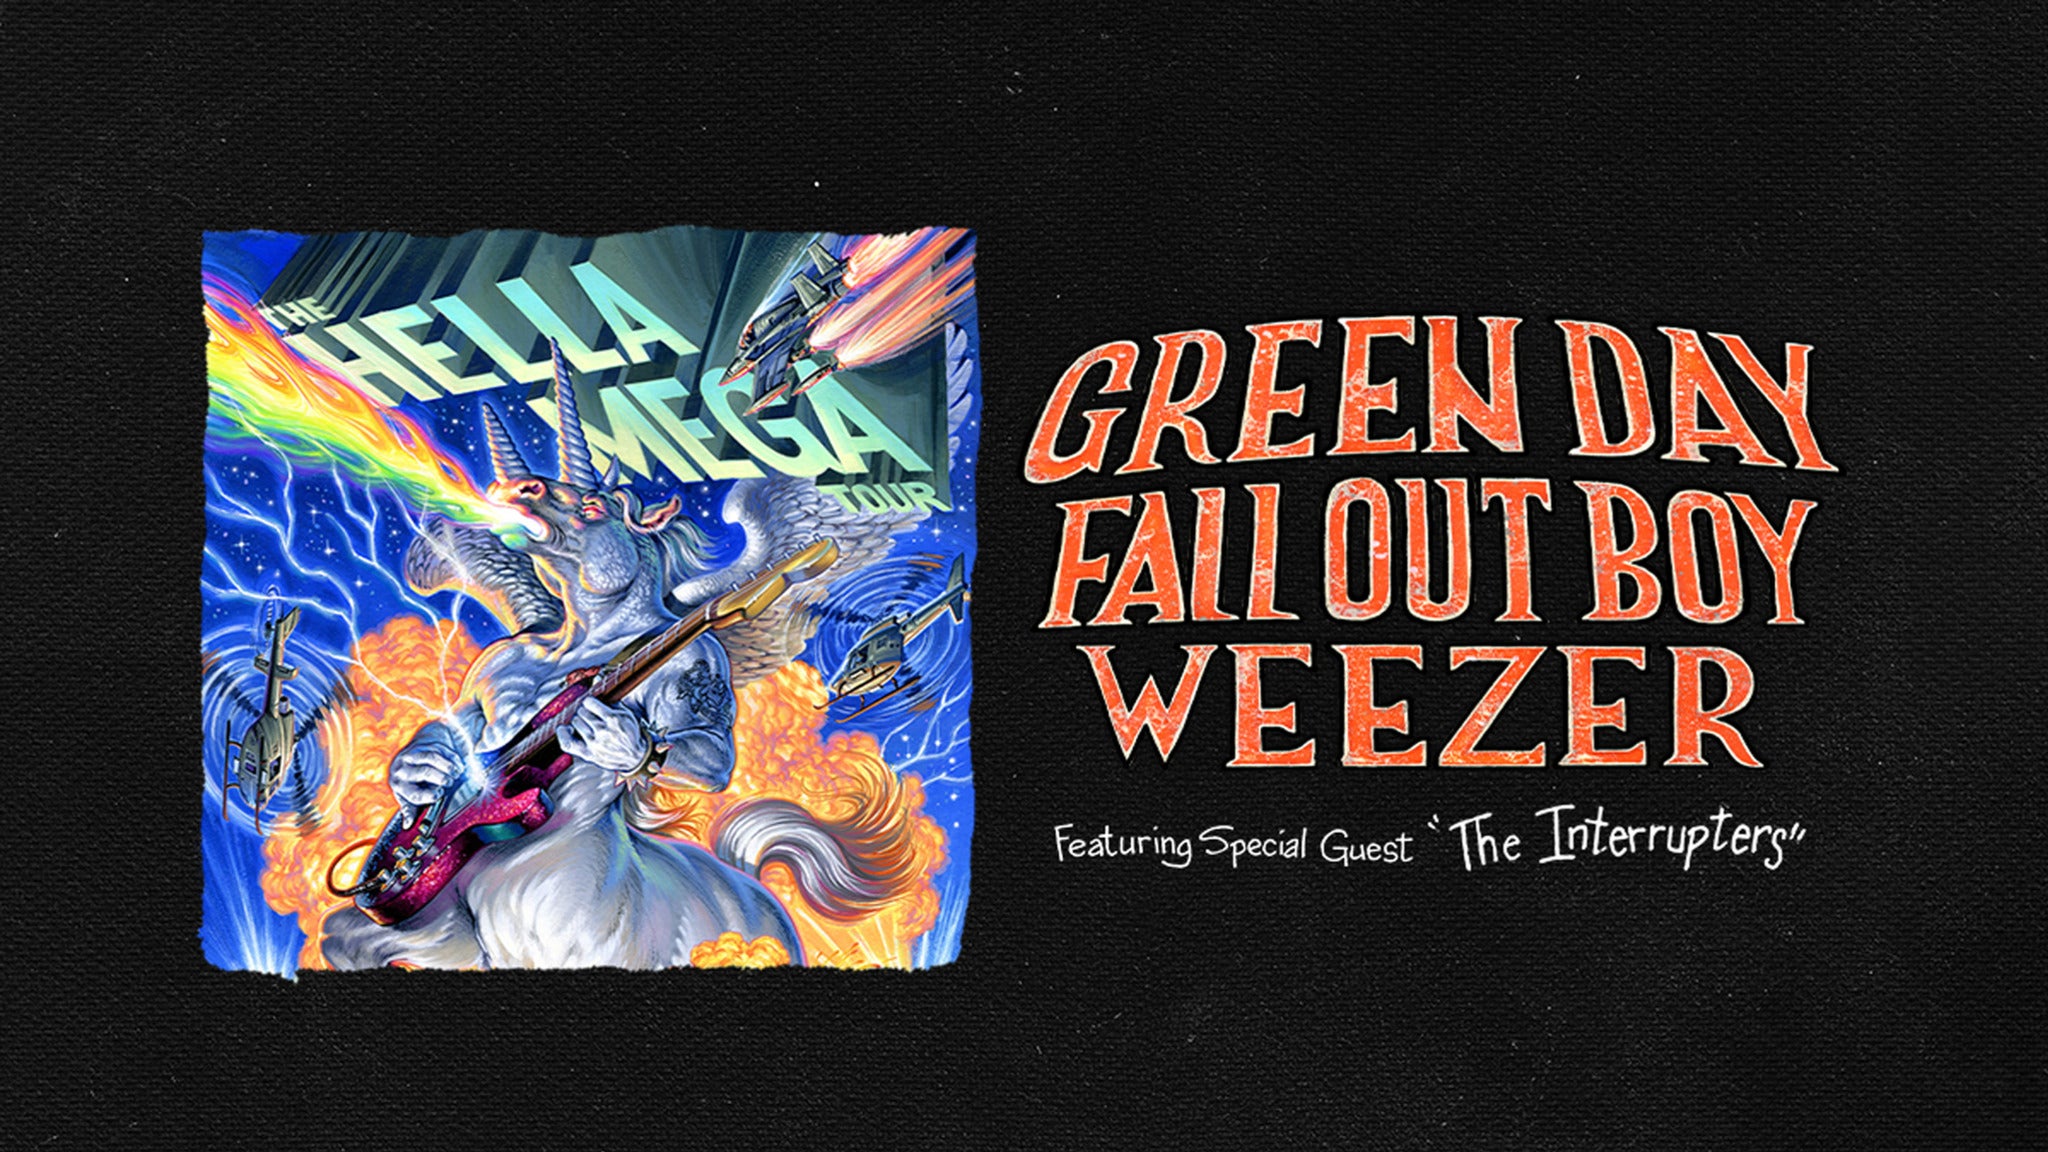 Hella Mega Tour-Green Day/Fall Out Boy/Weezer Pres. by Harley-Davidson